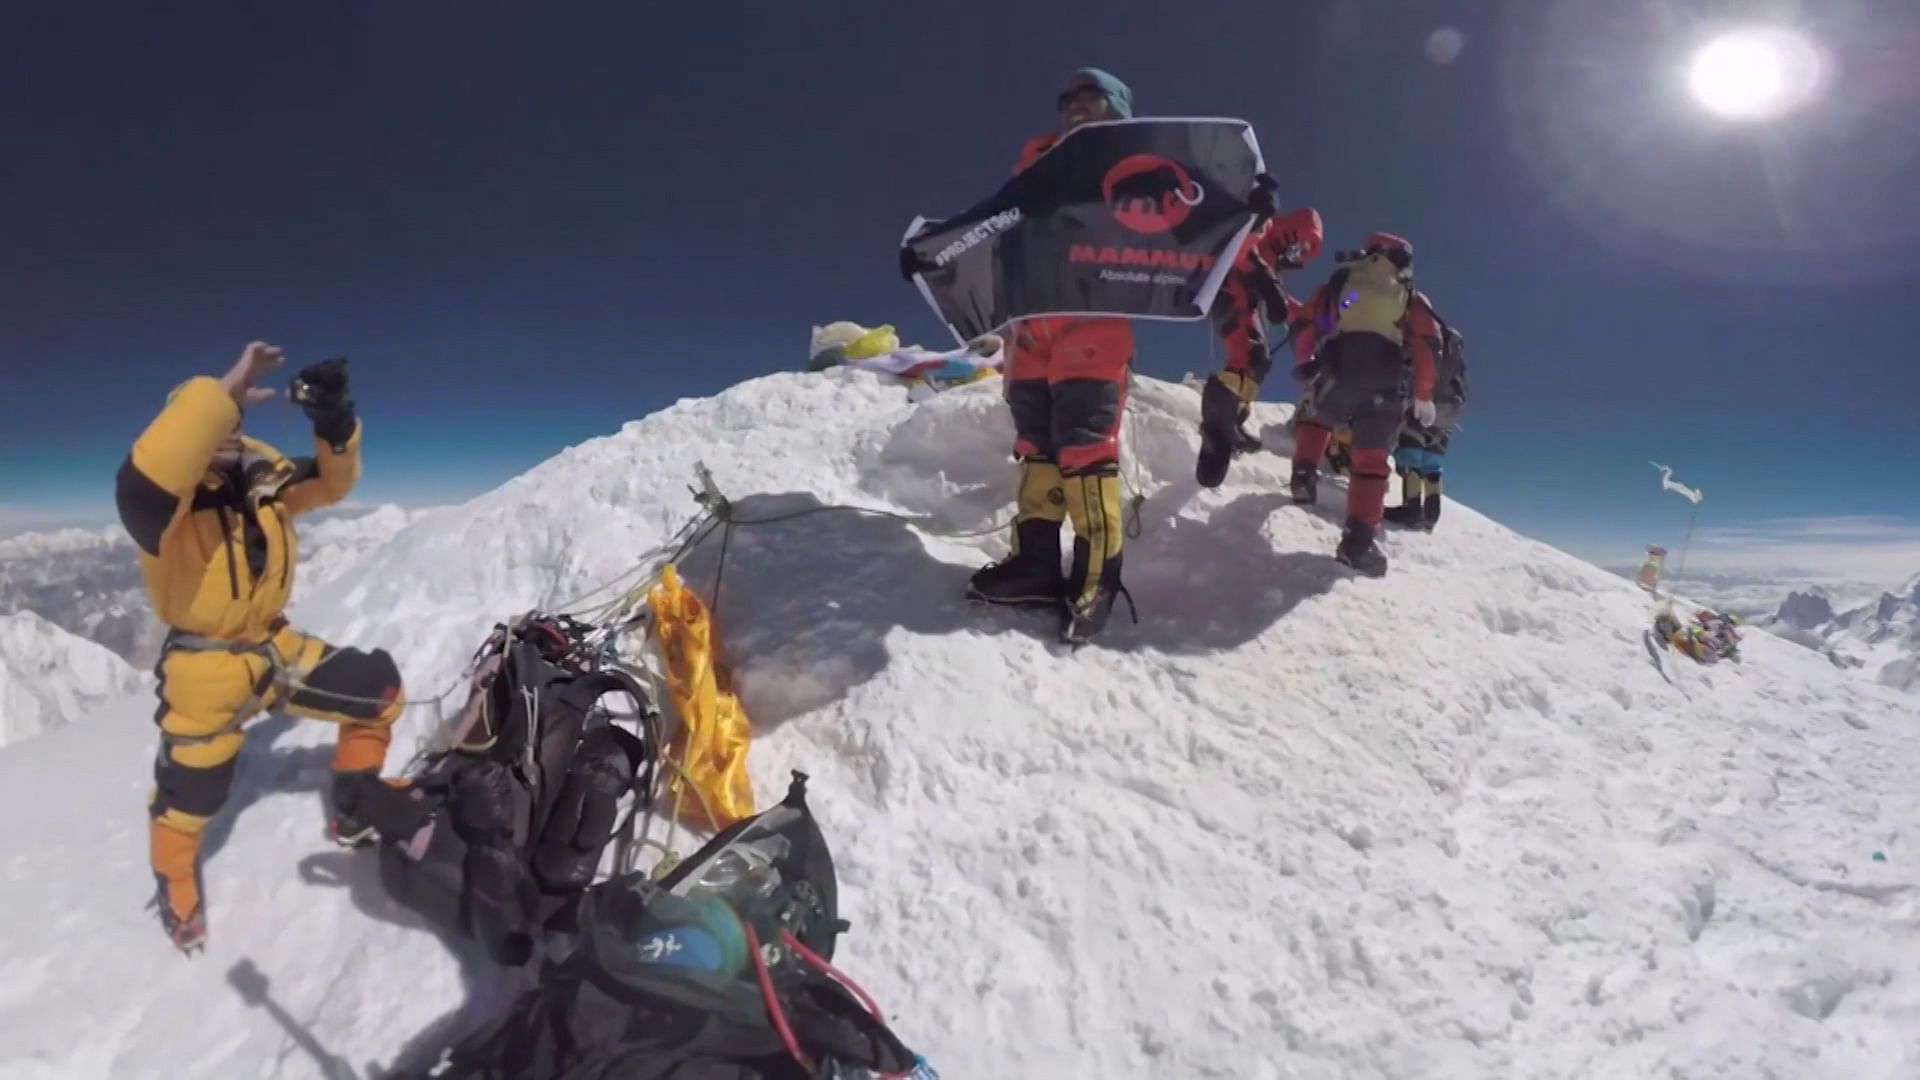 A group of intrepid explorers have documented the summit of Mount Everest using a 360 degree camera. (Photo: AP screengrab)